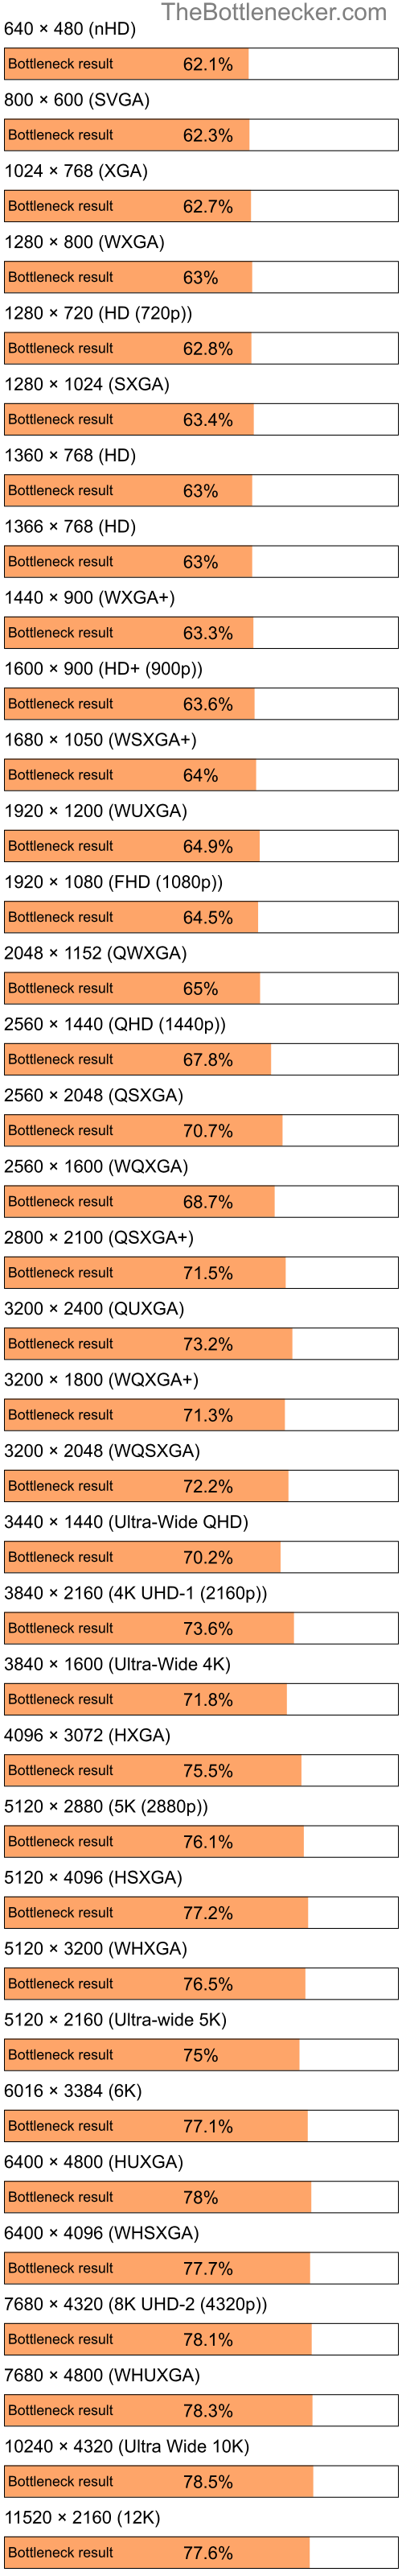 Bottleneck results by resolution for Intel Pentium 4 and Intel G31 Express in Processor Intense Tasks